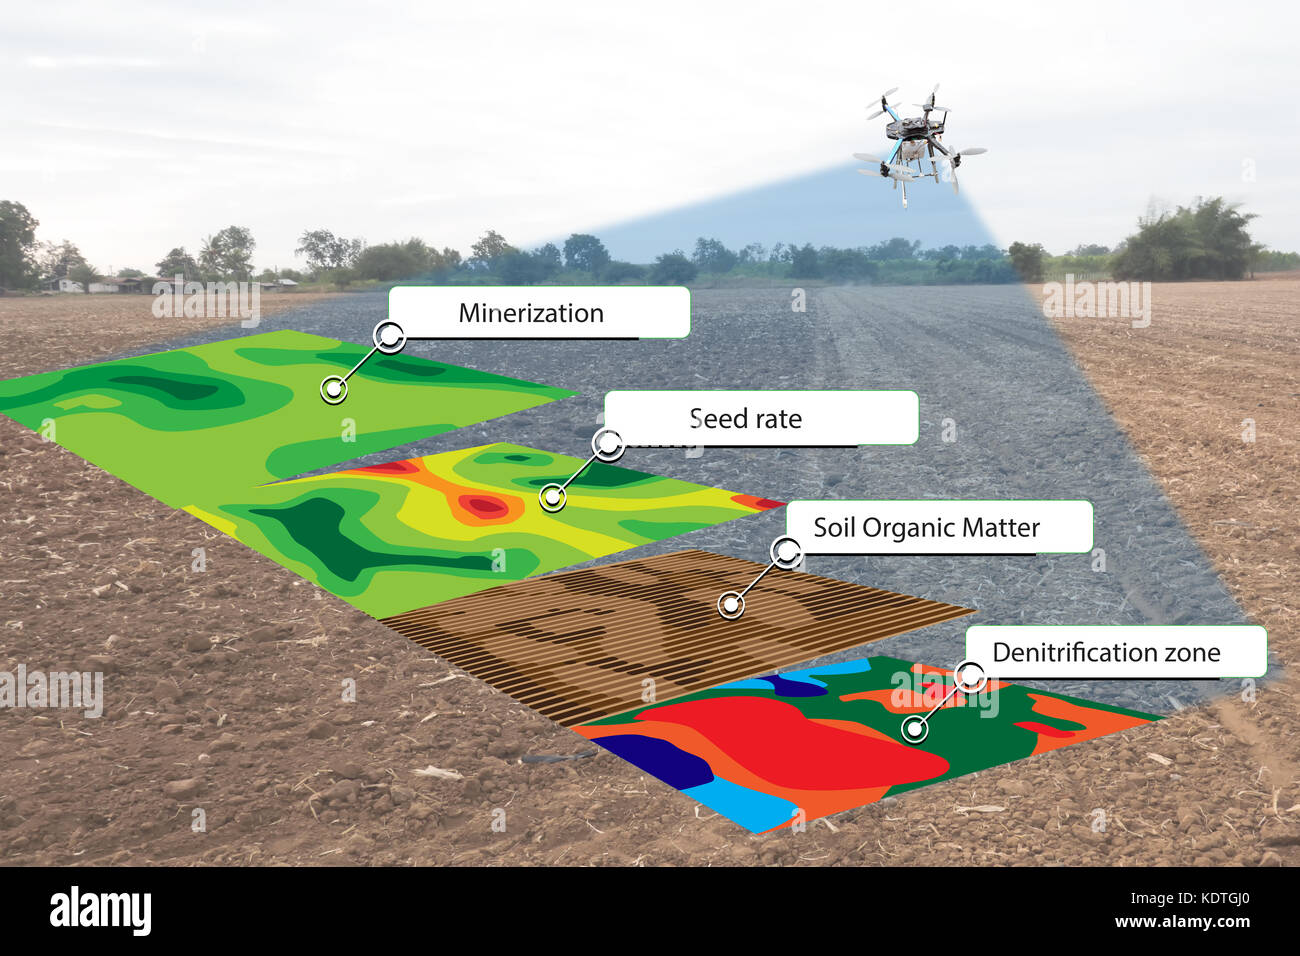 smart agriculture concept, farmer use infrared in drone with high definition soil mapping while planting,conduct deep soil scan during a tillage pass  Stock Photo